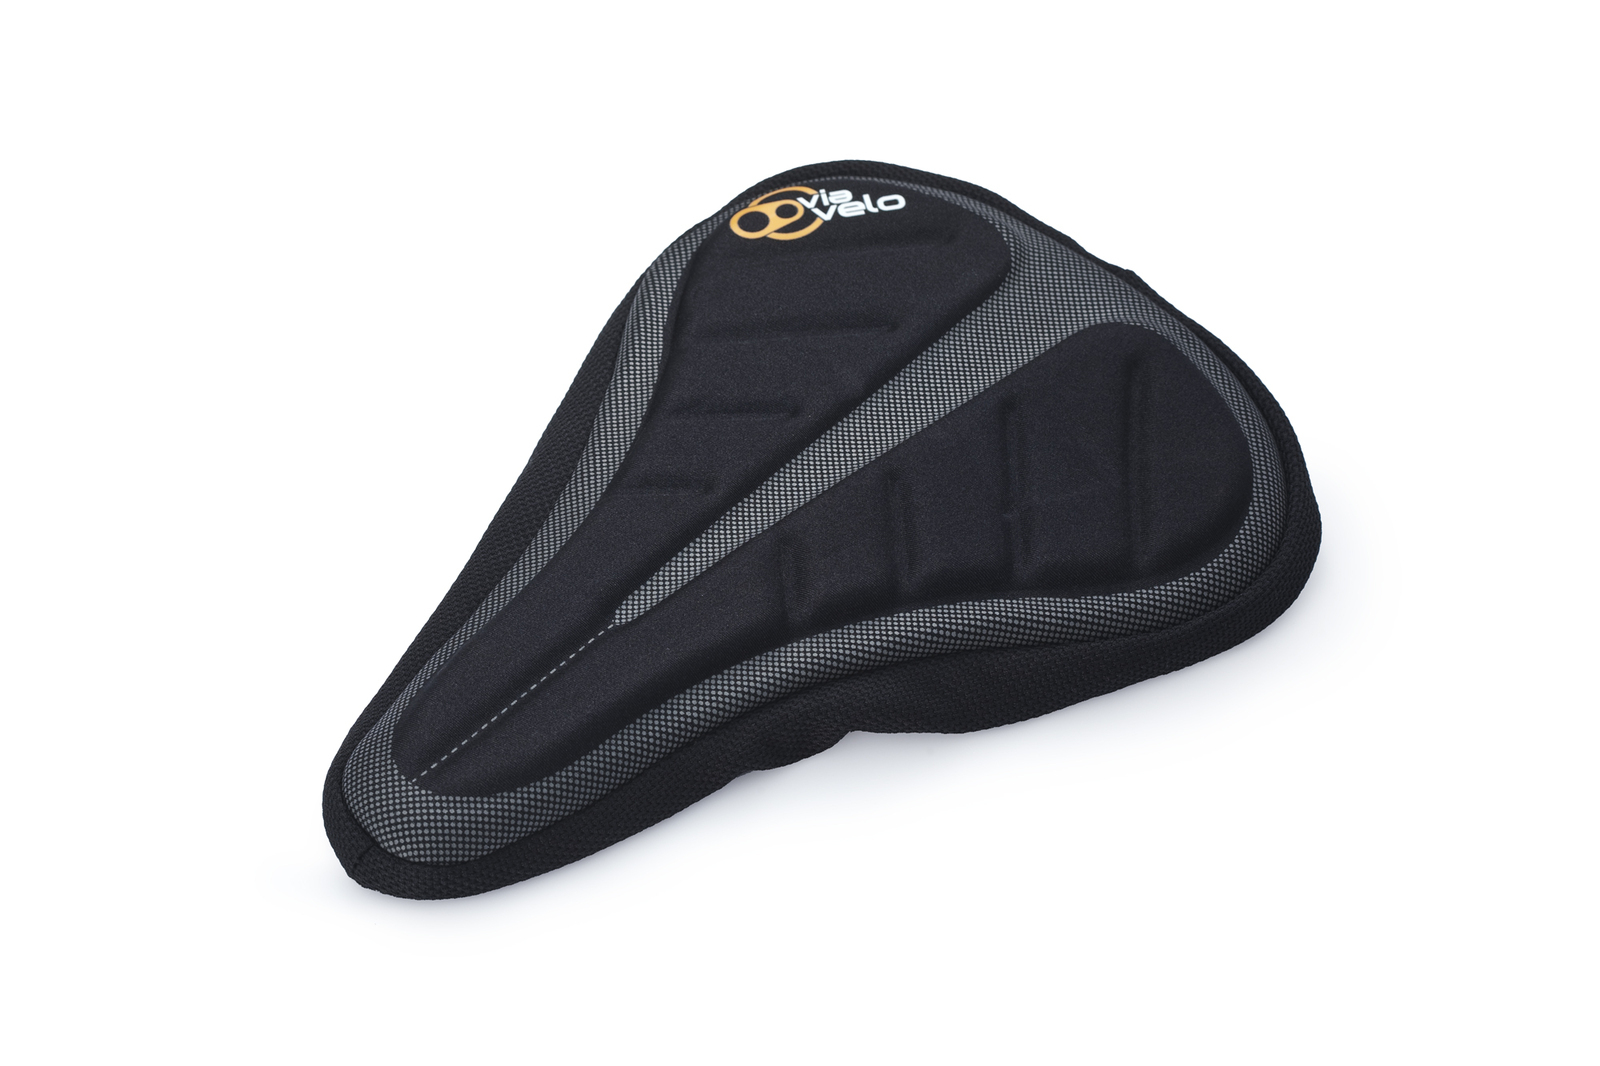  Seat Cover Gel Fits Most Saddle Sizes 310 Grams Via Velo Brand  Seat Cover Gel Fits Most Saddle Sizes 310 Grams Via Velo Brand